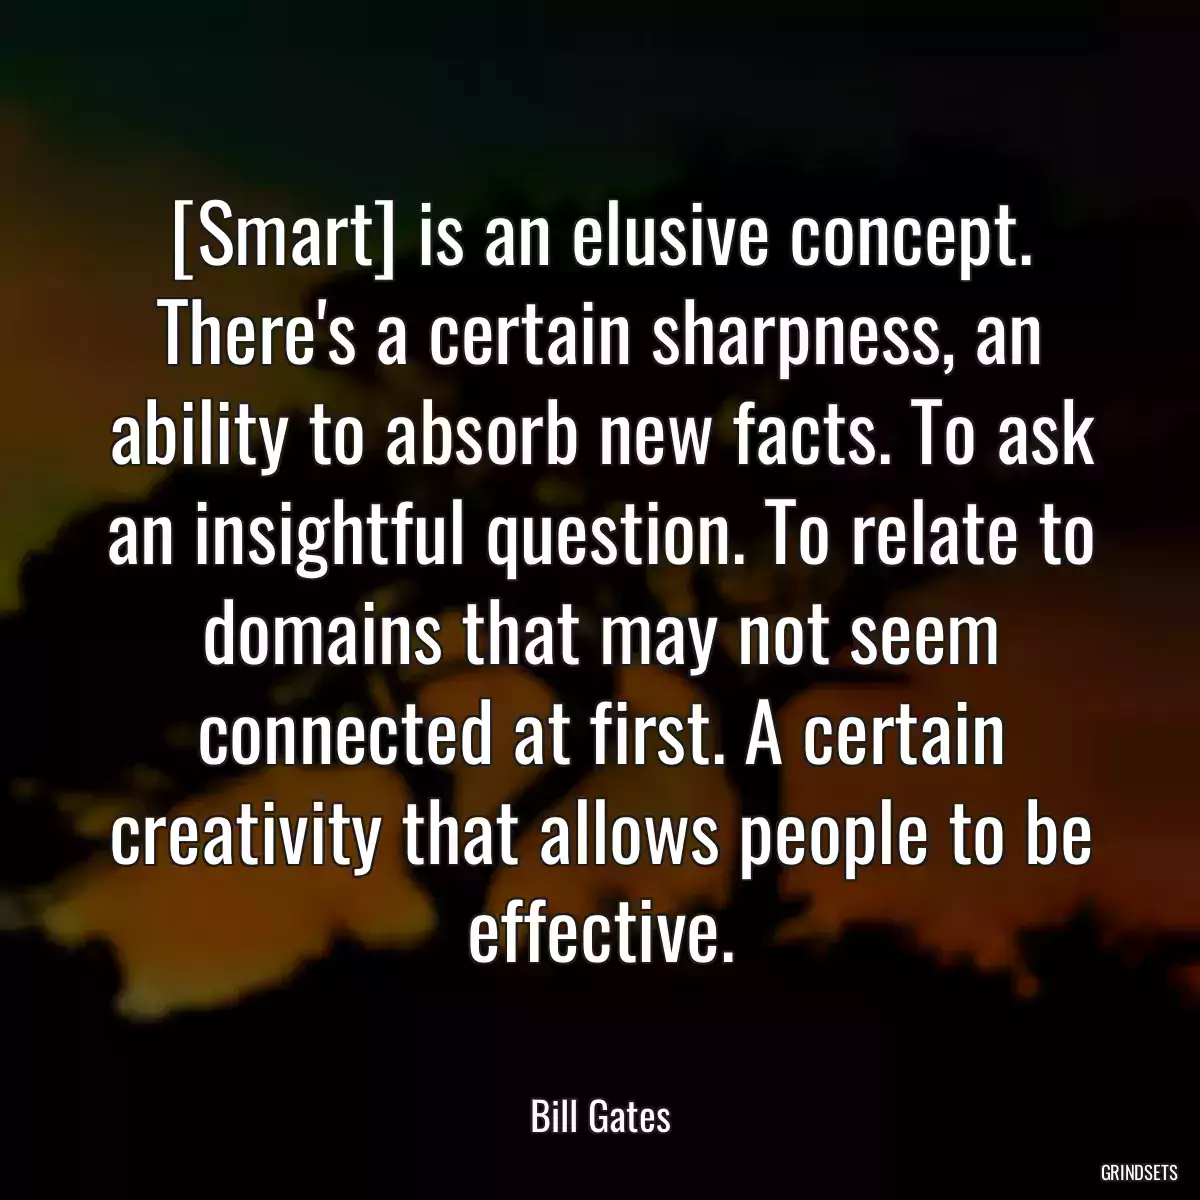 [Smart] is an elusive concept. There\'s a certain sharpness, an ability to absorb new facts. To ask an insightful question. To relate to domains that may not seem connected at first. A certain creativity that allows people to be effective.